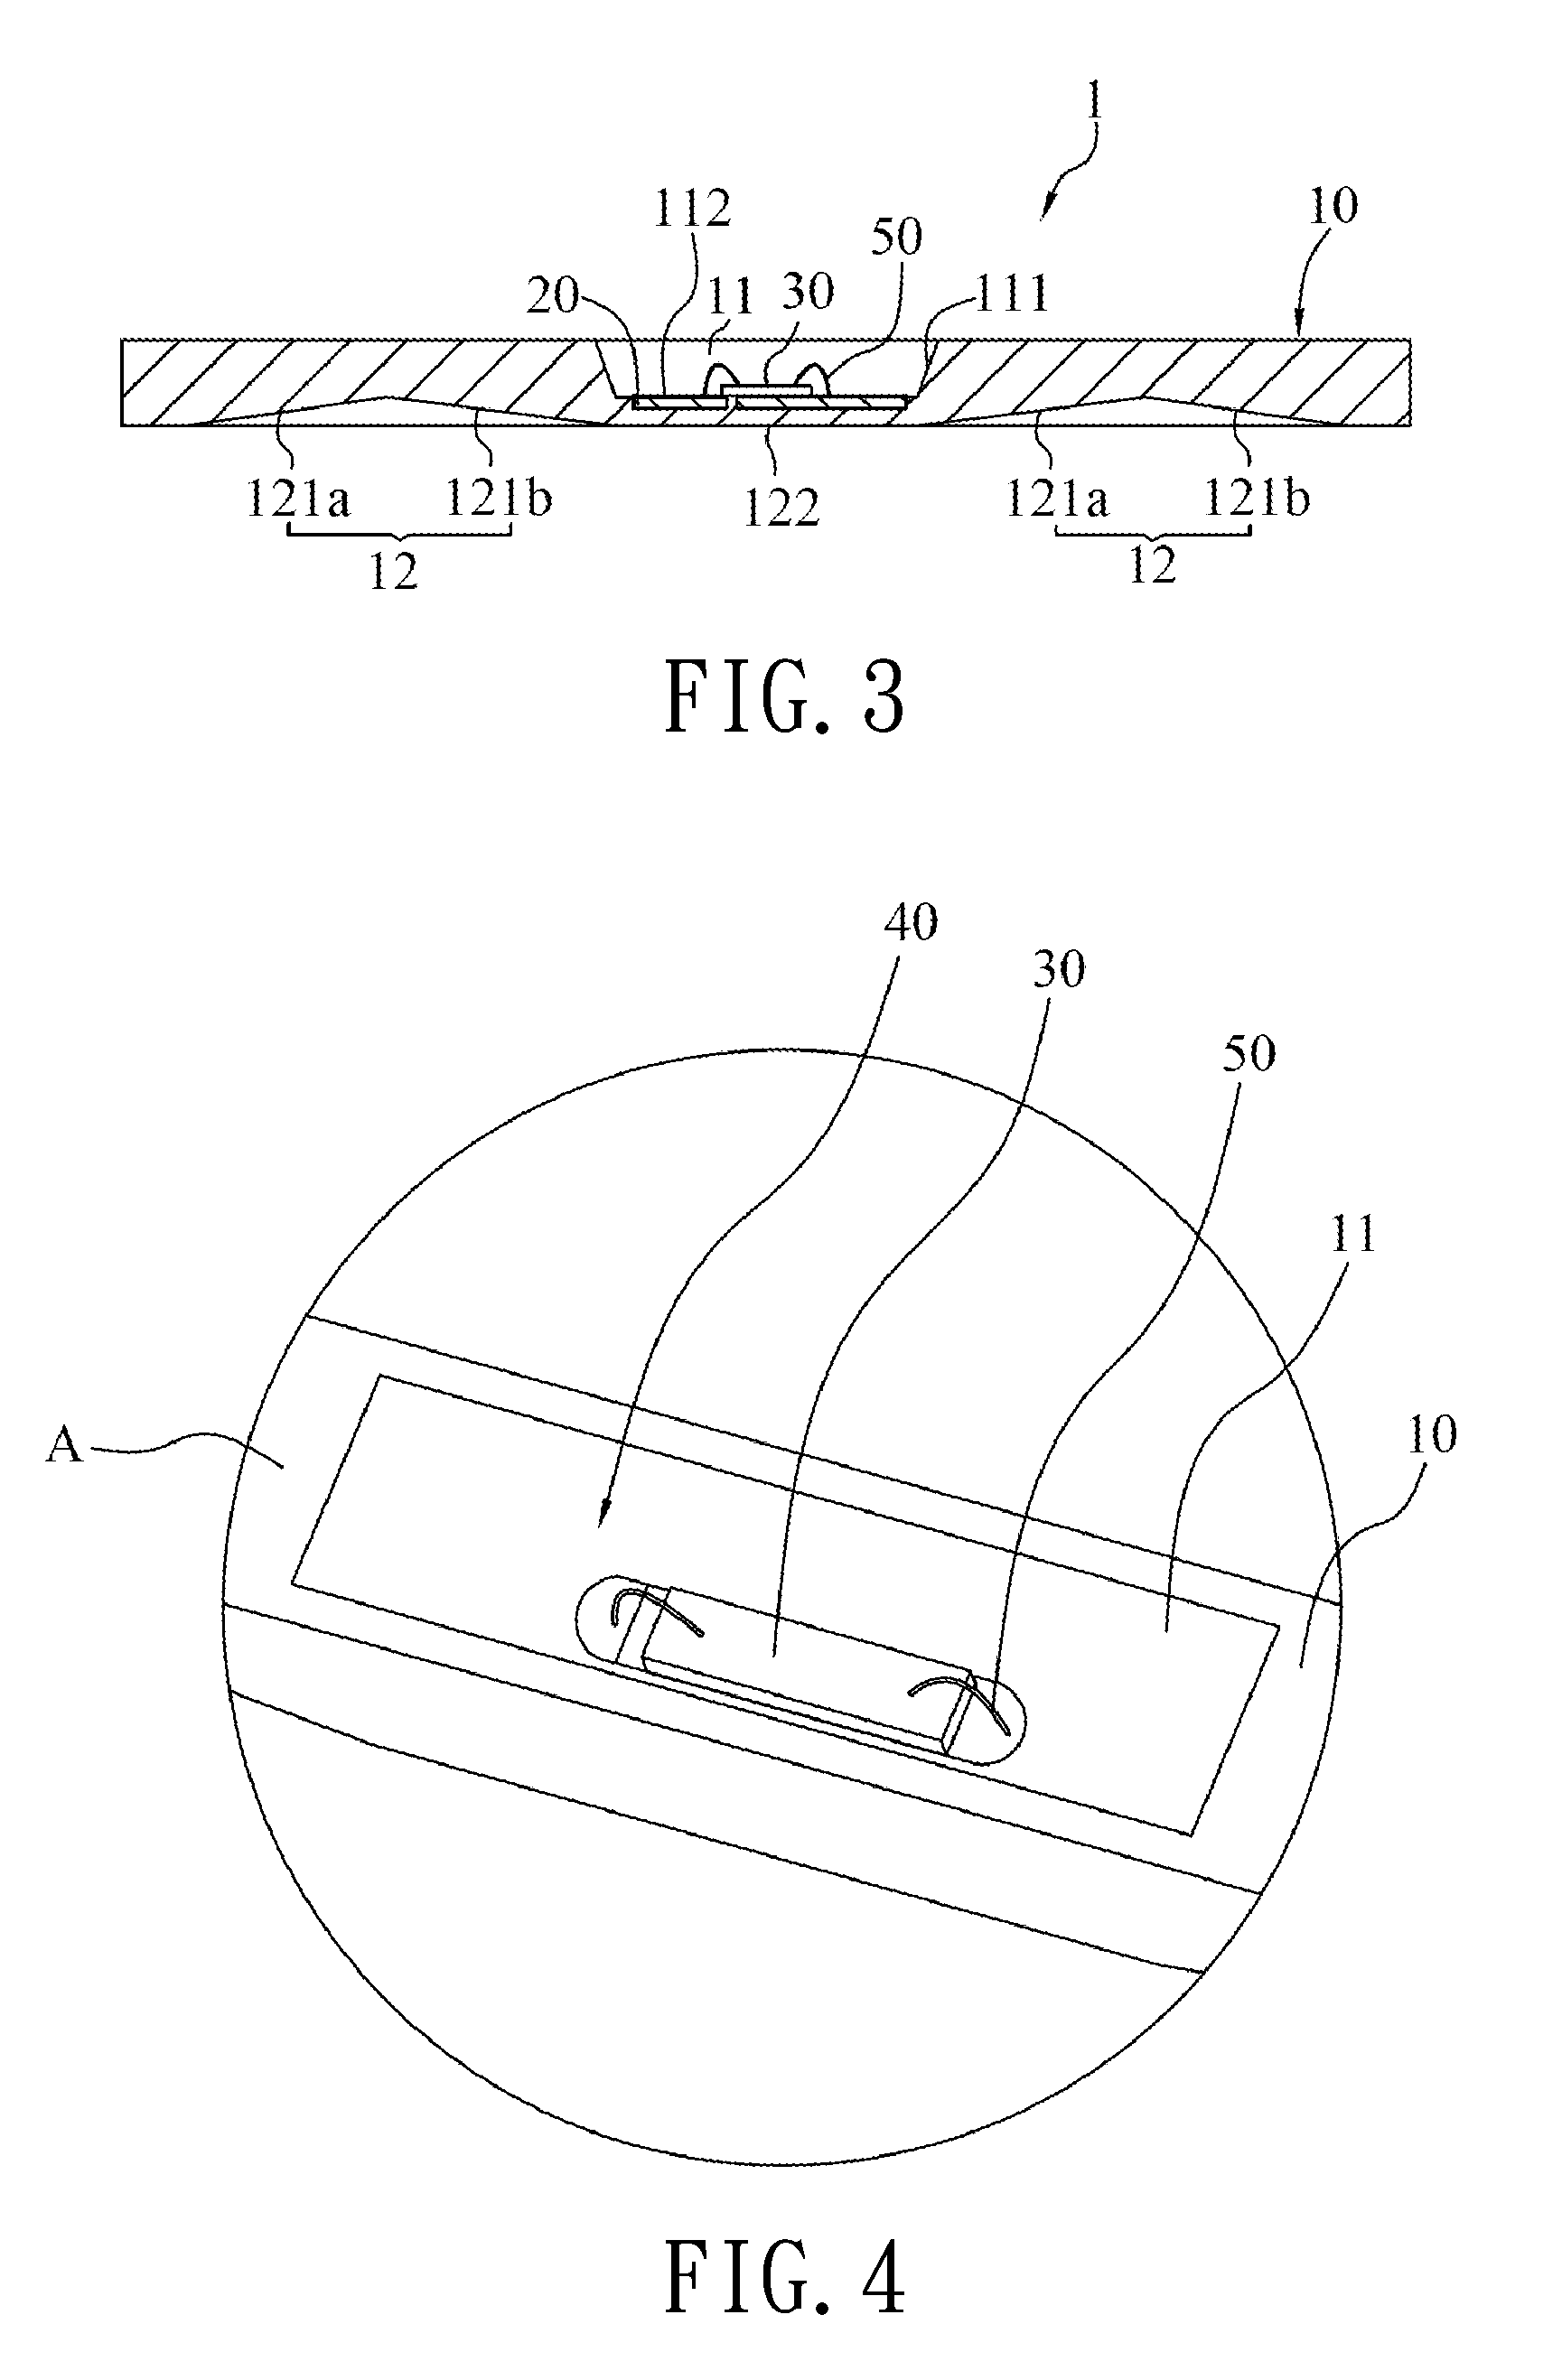 Light-emitting diode module with a reflecting portion having two inclined planes opposite to each other